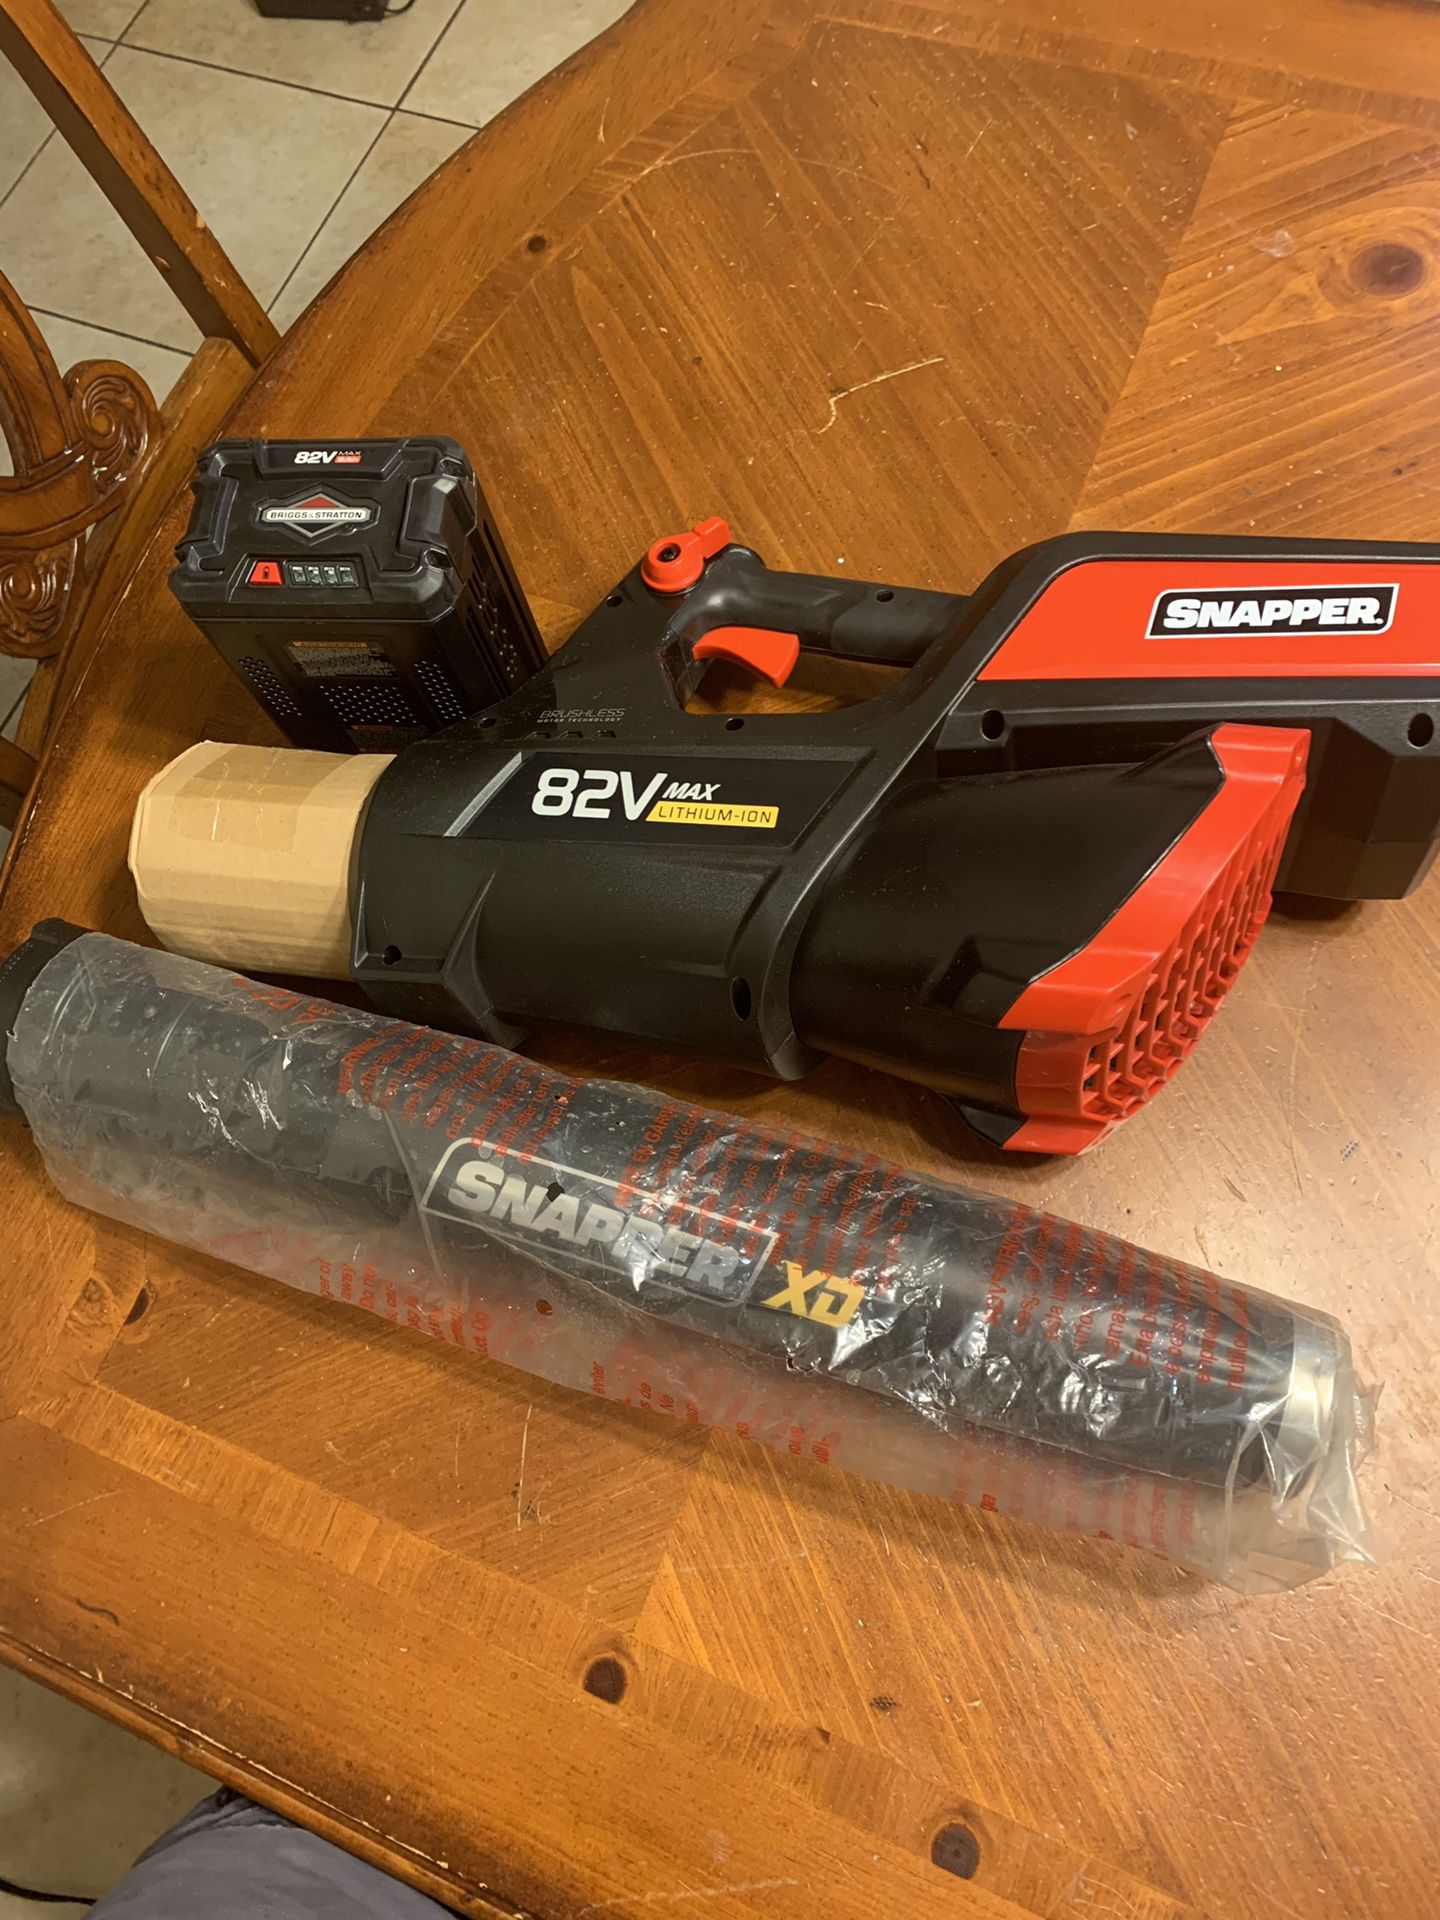 Snapped 82v Max lithium battery leaf blower on sale